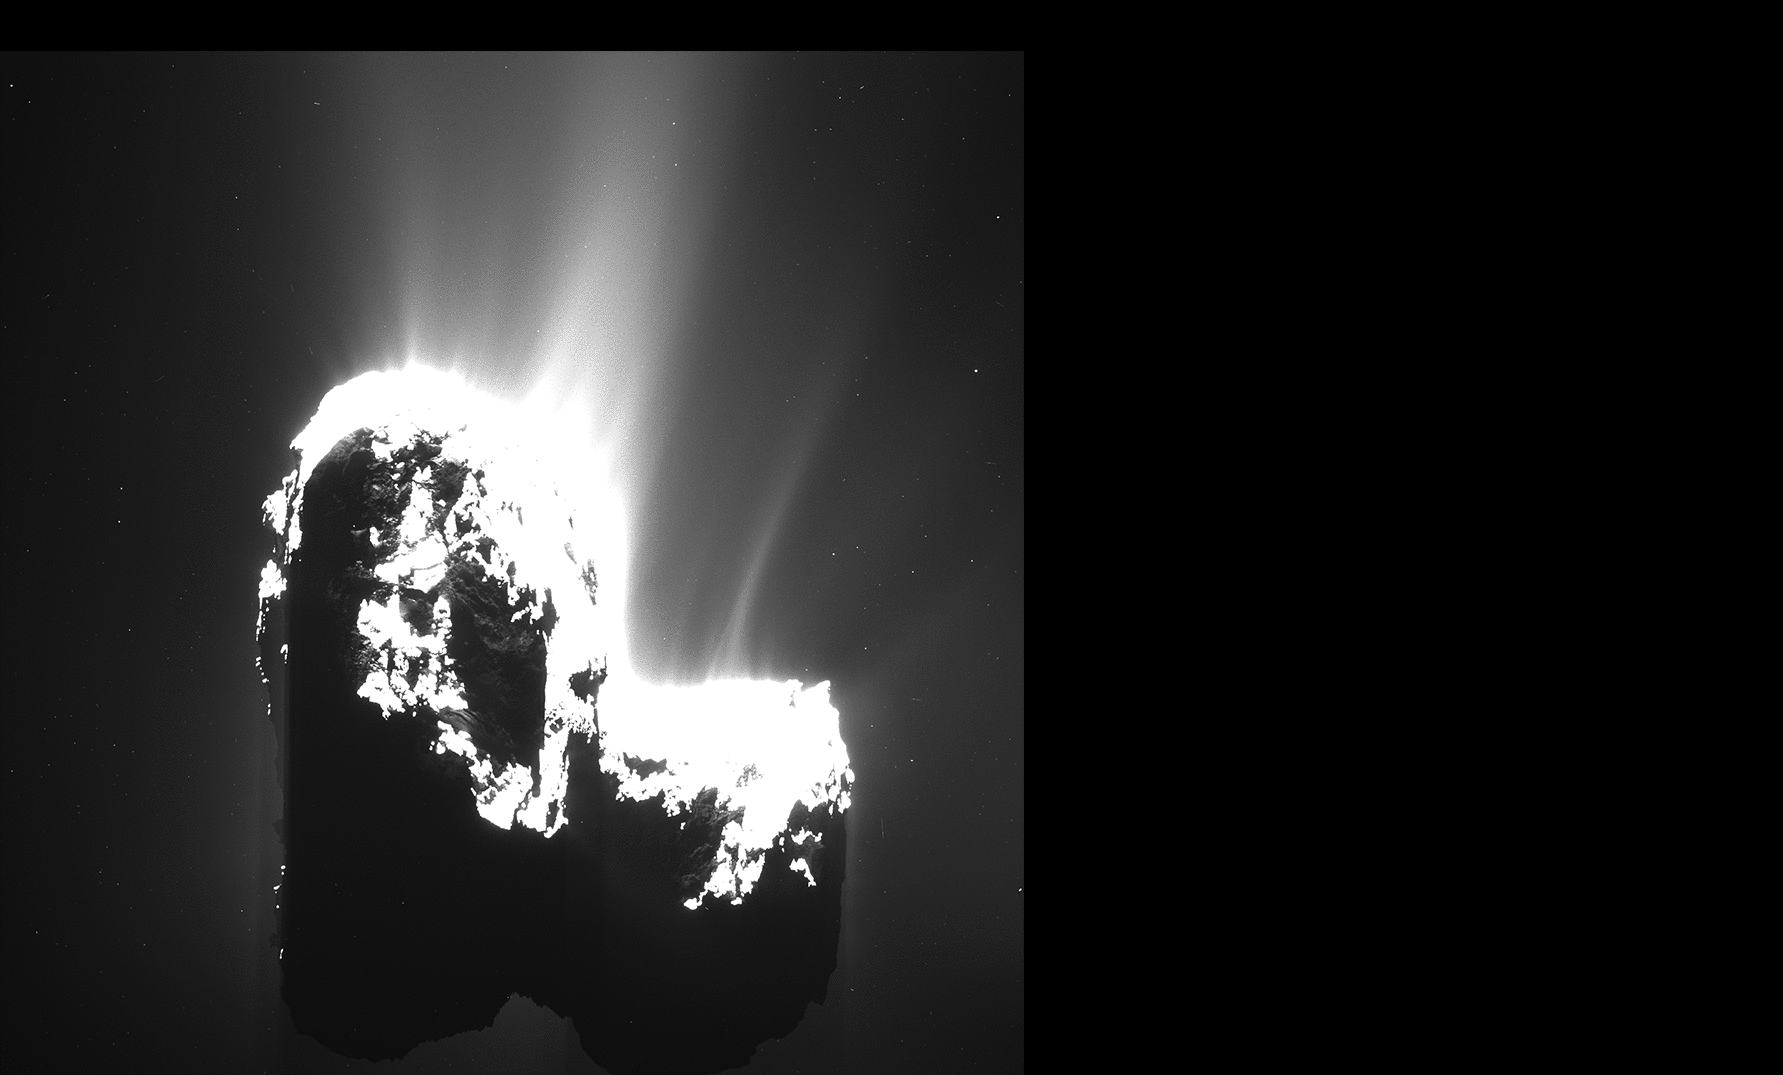 Rotating comet 67P (aligned on background stars)